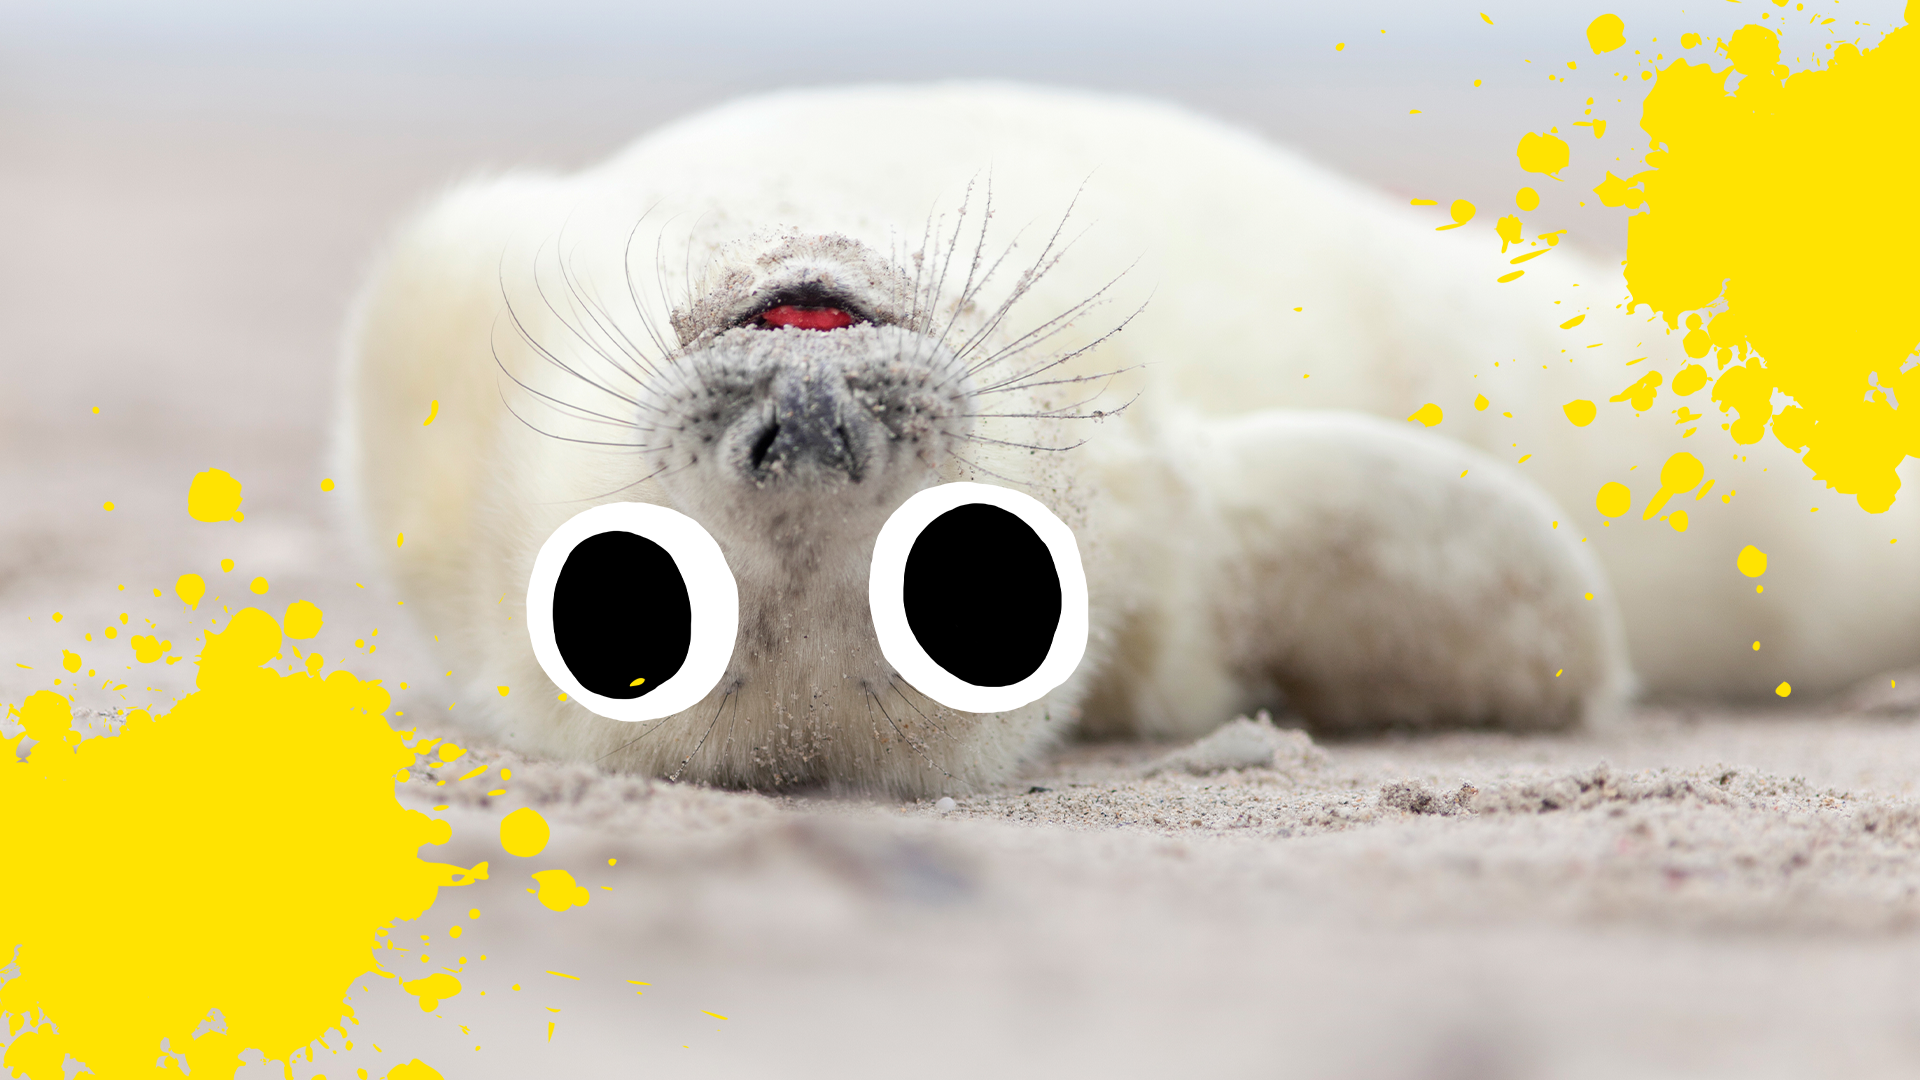 Cute seal with yellow splats